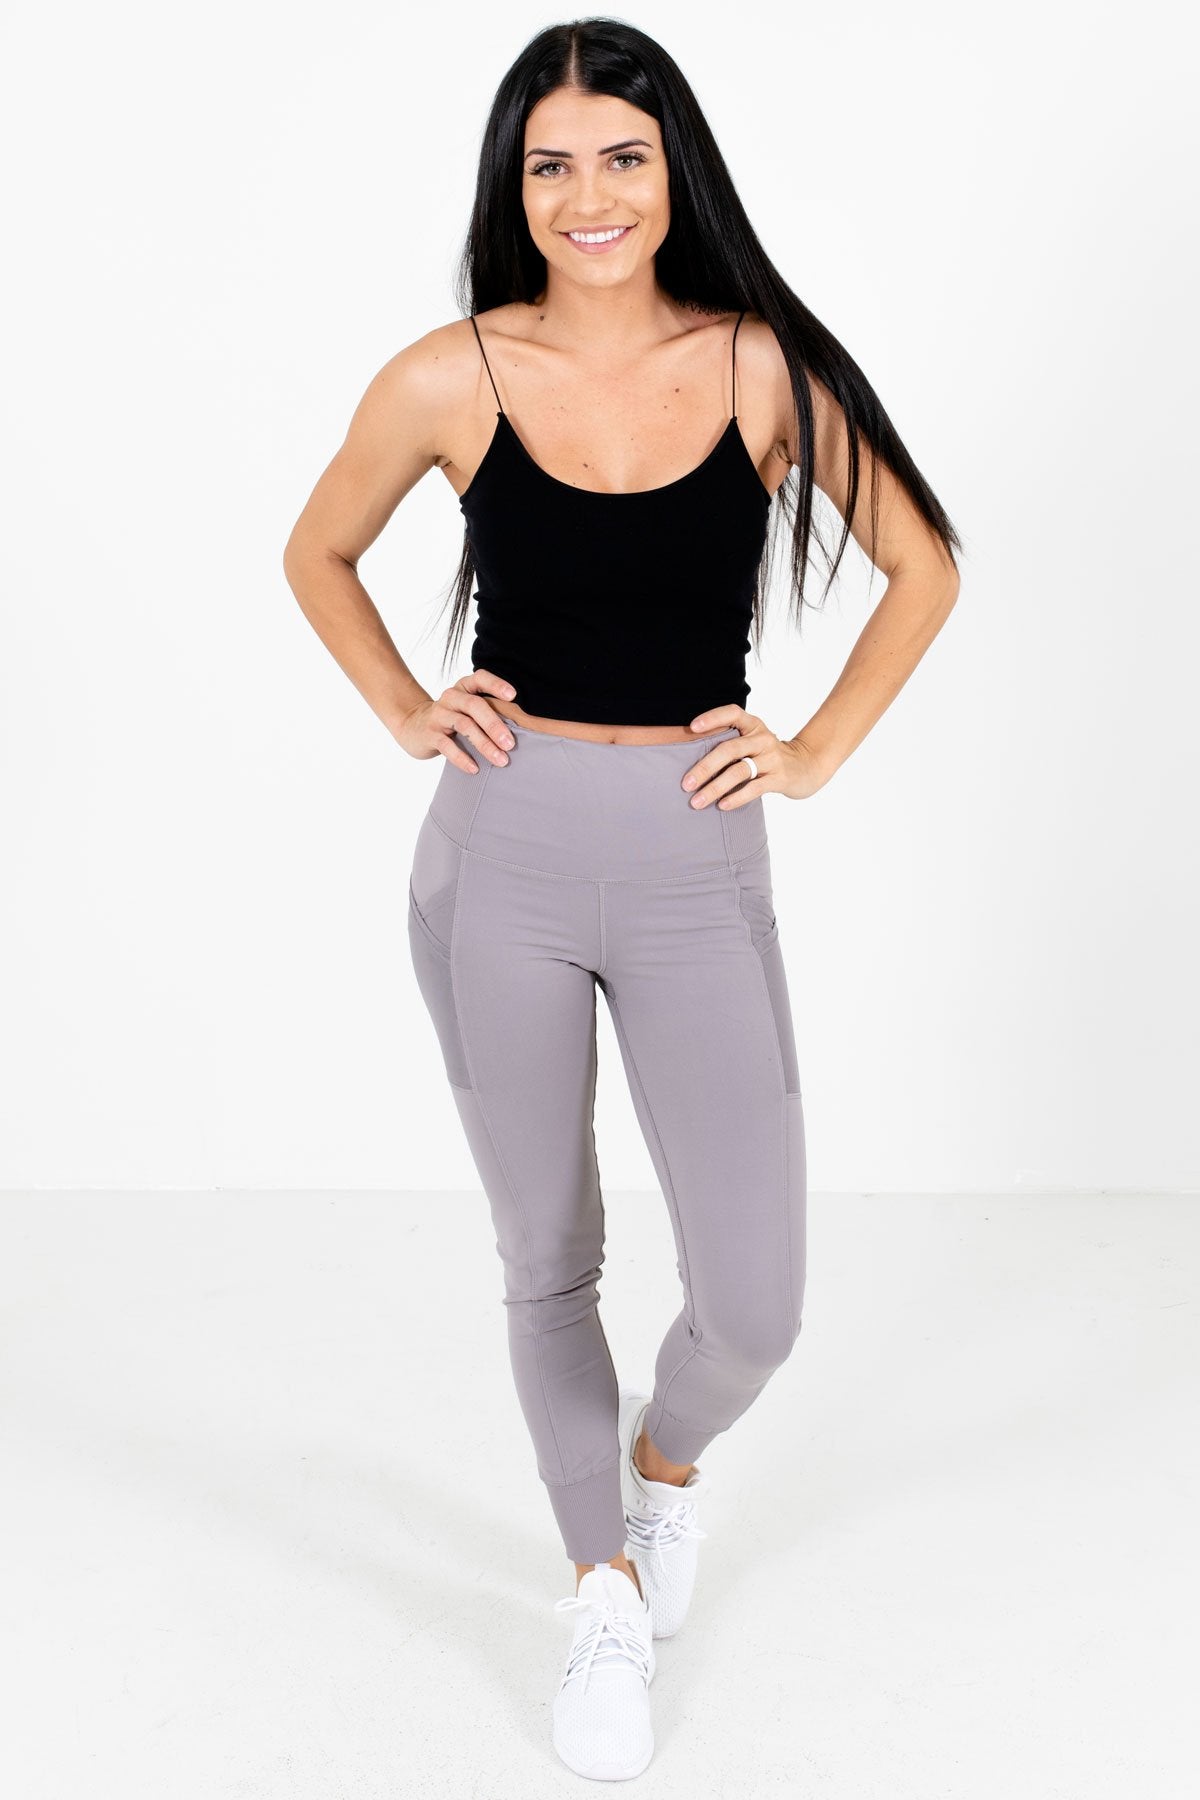 Black Active Seamless Cropped Tank